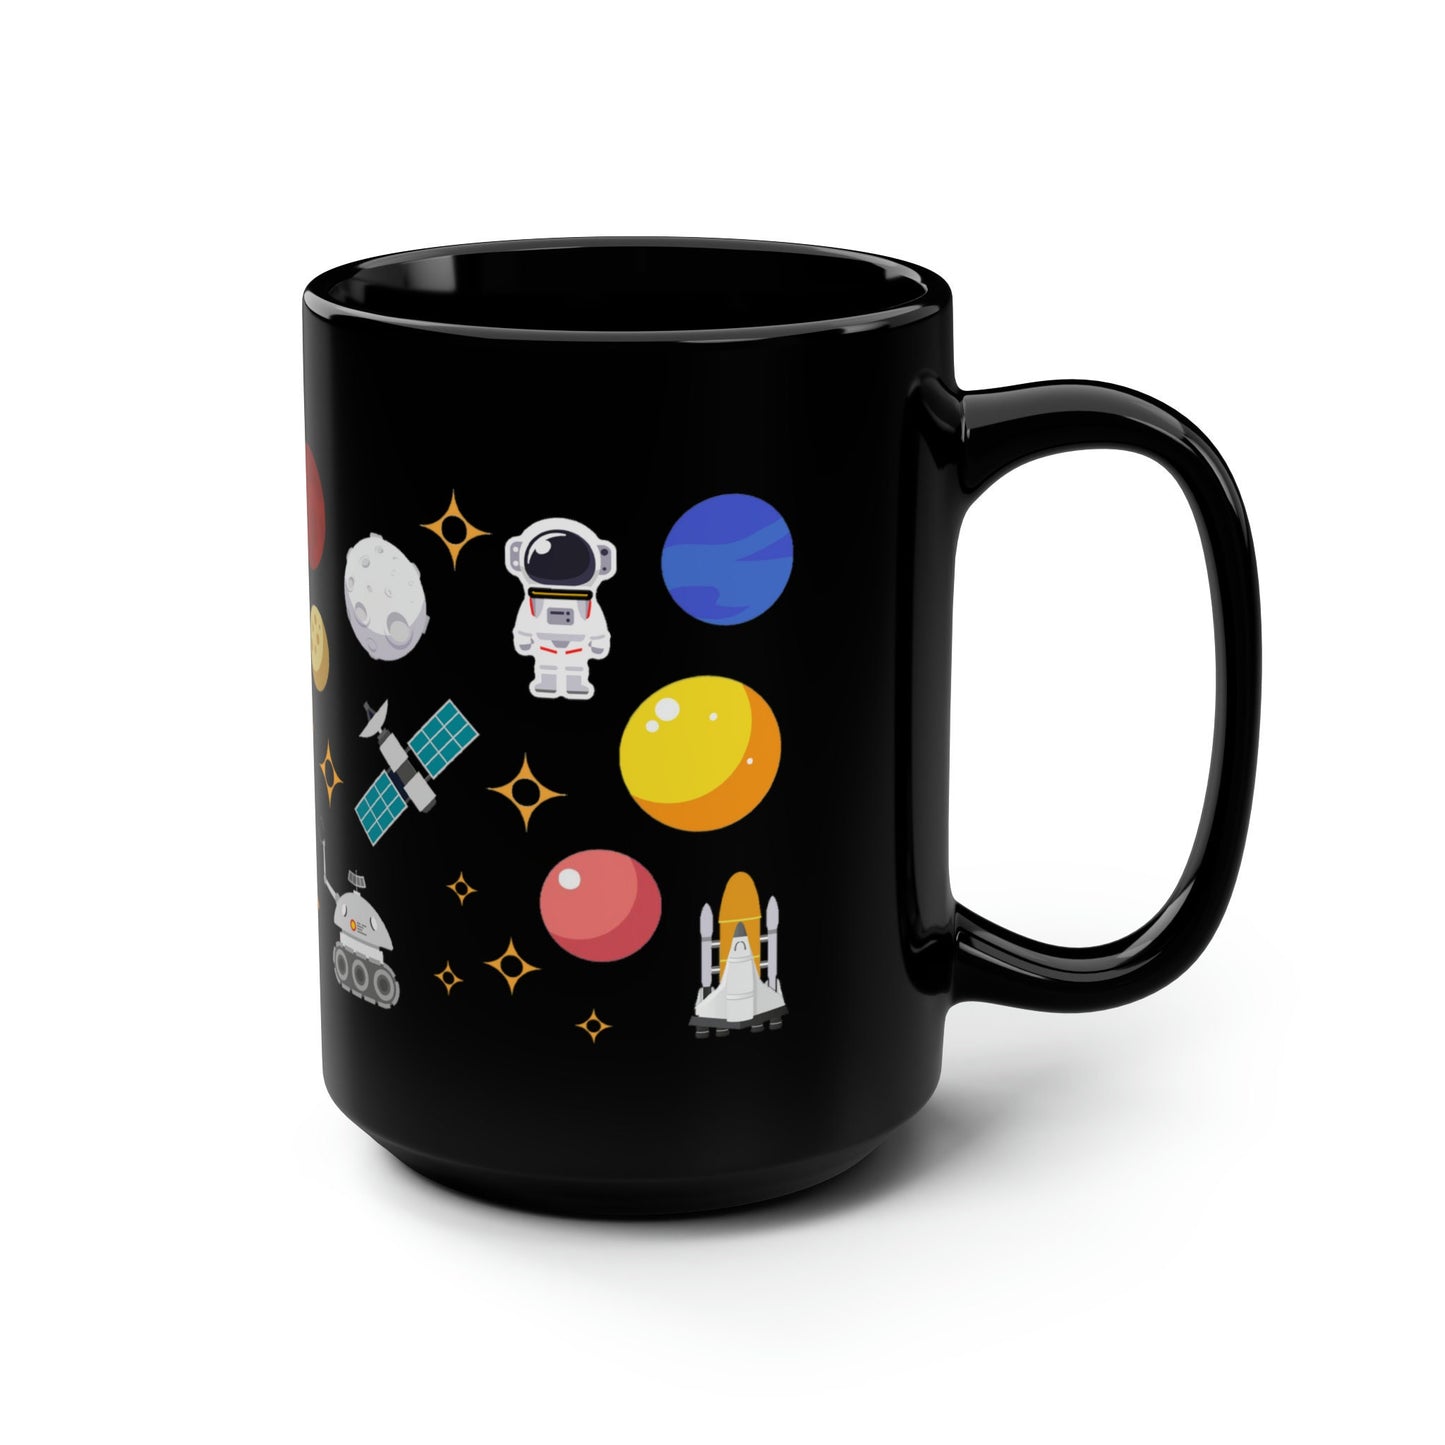 a black coffee mug with space and planets on it